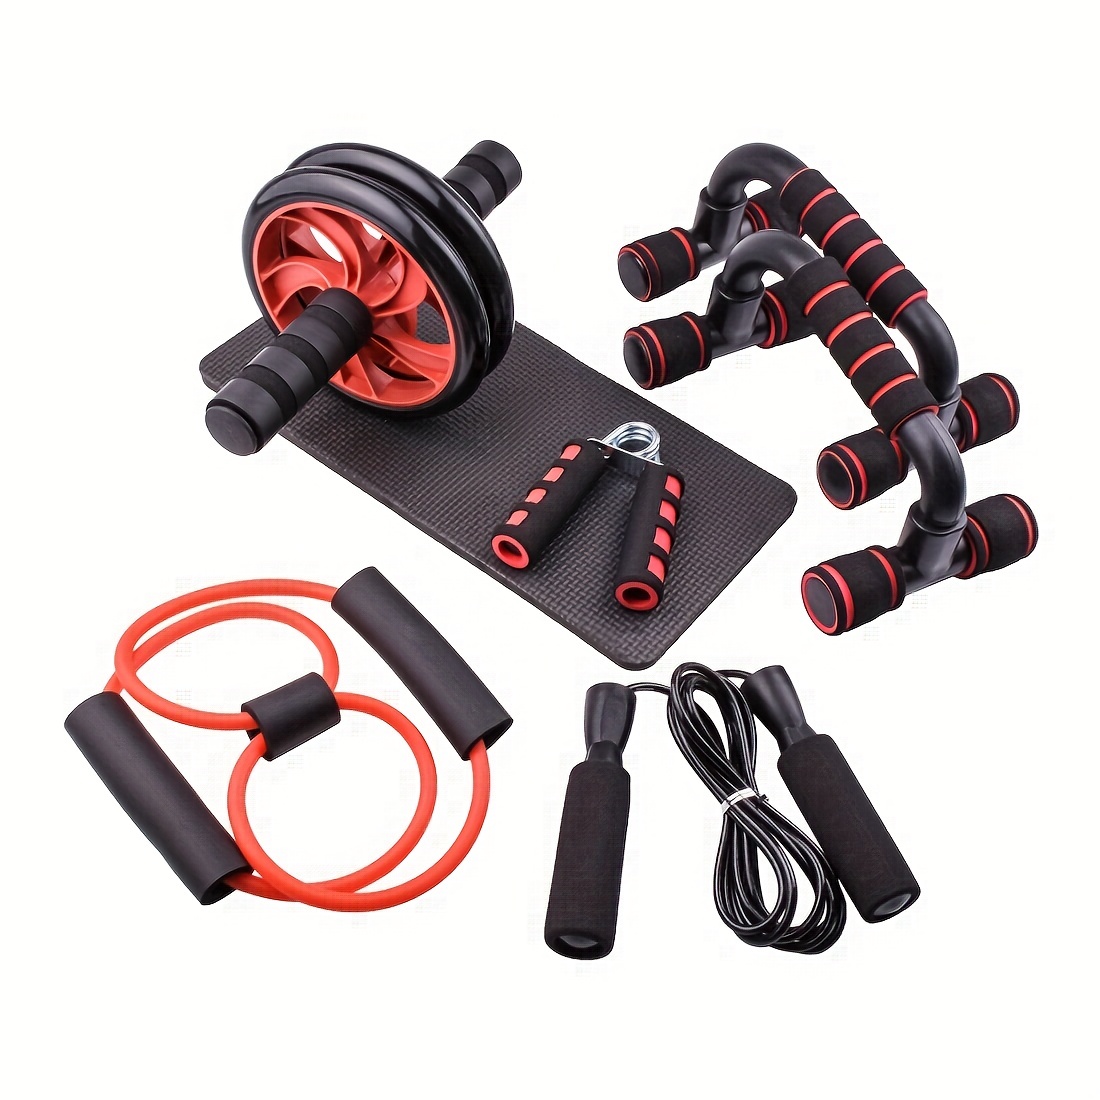 Hulajoy - Calisthenics Equipment | Exercise Equipment, Workout Equipment,  Home Gym | Resistance Bands, Jump Rope, Ab Roller Wheel, Push up Grips 